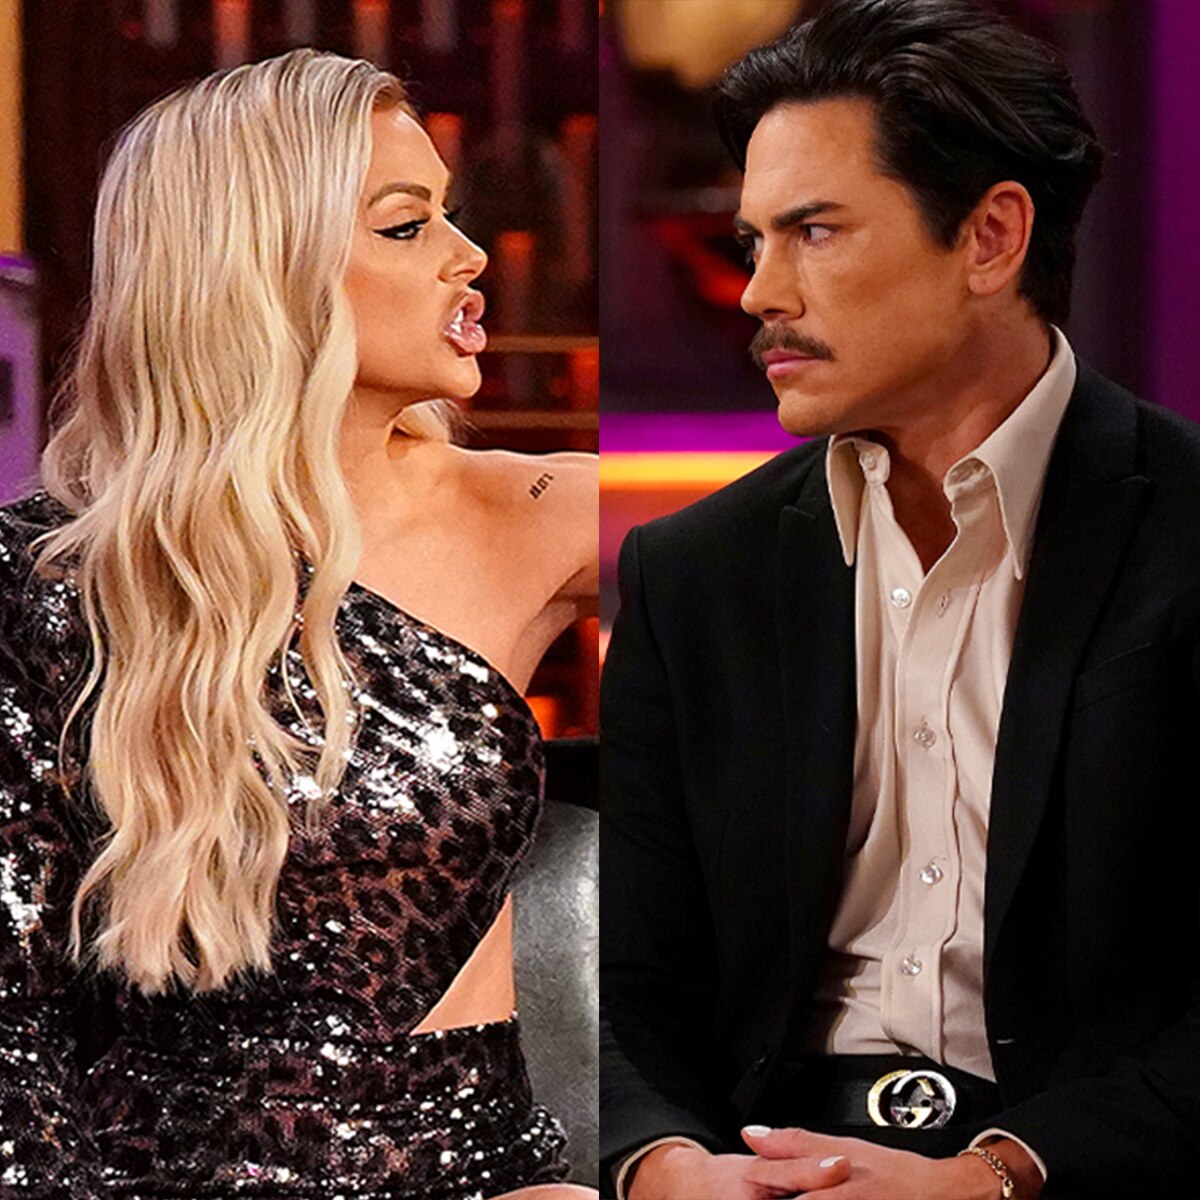 Lala Kent Slams Tom Sandoval Over Comment He Made About Her Daughter picture photo image